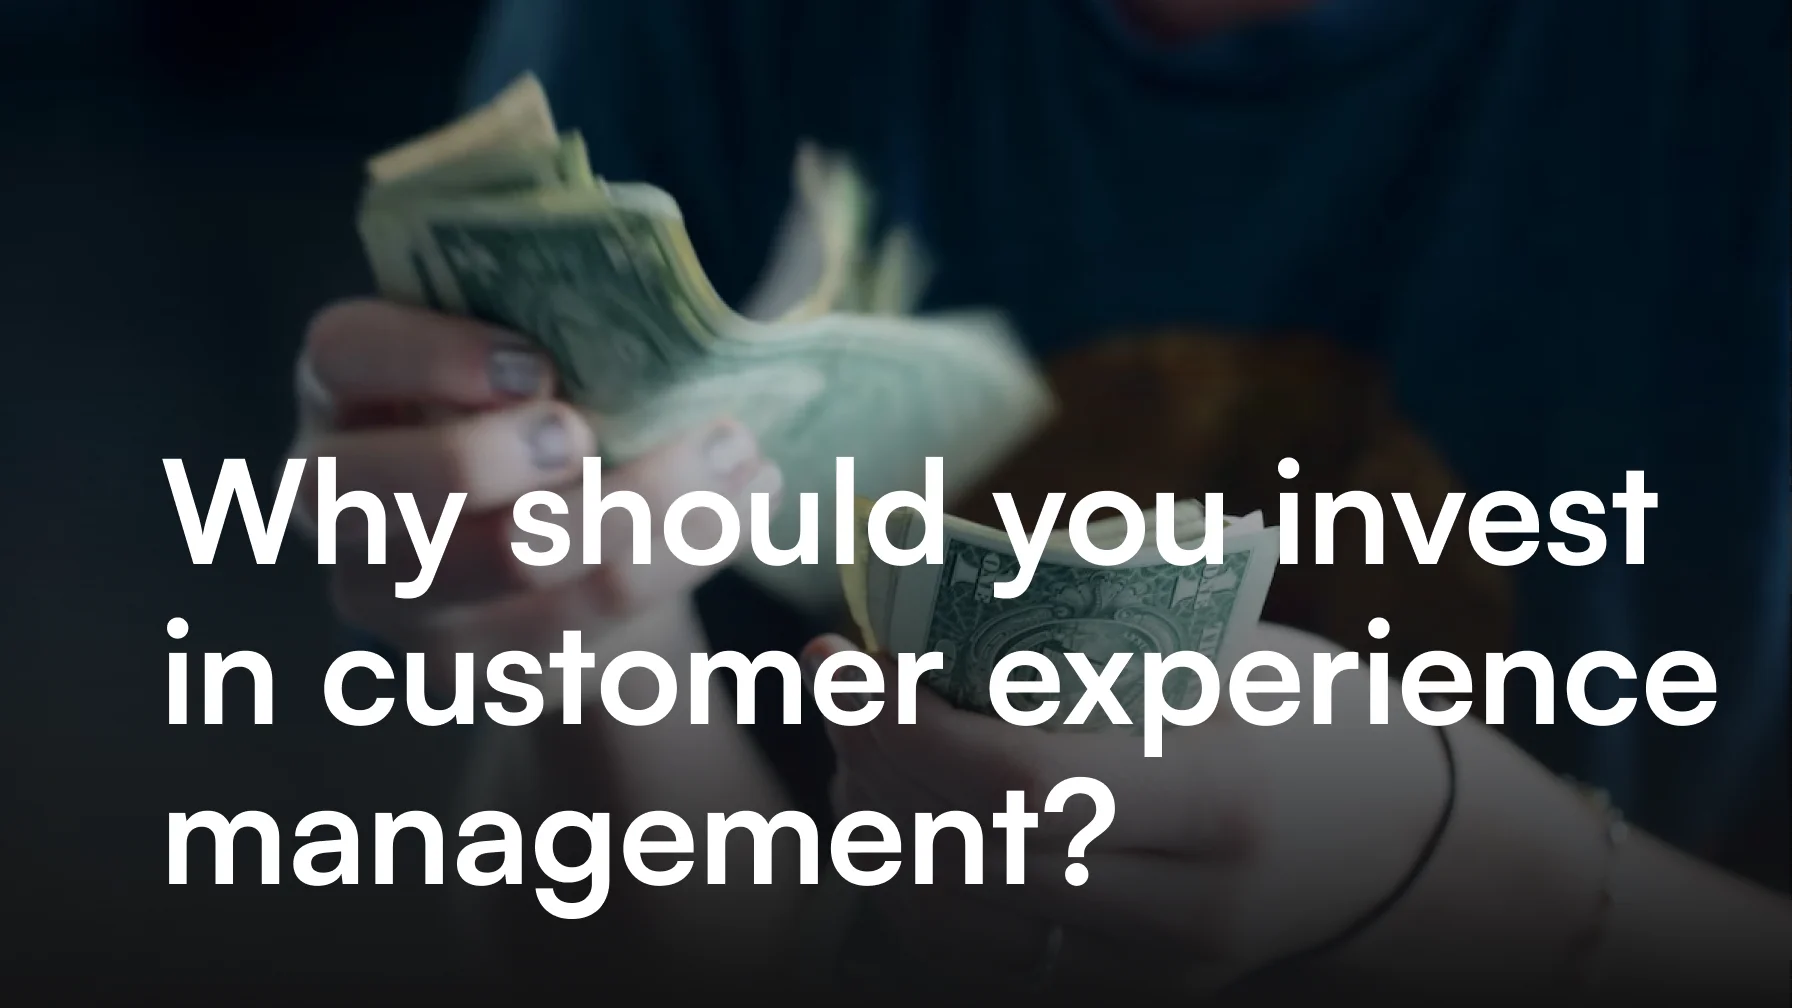 Why should you invest in customer experience management?